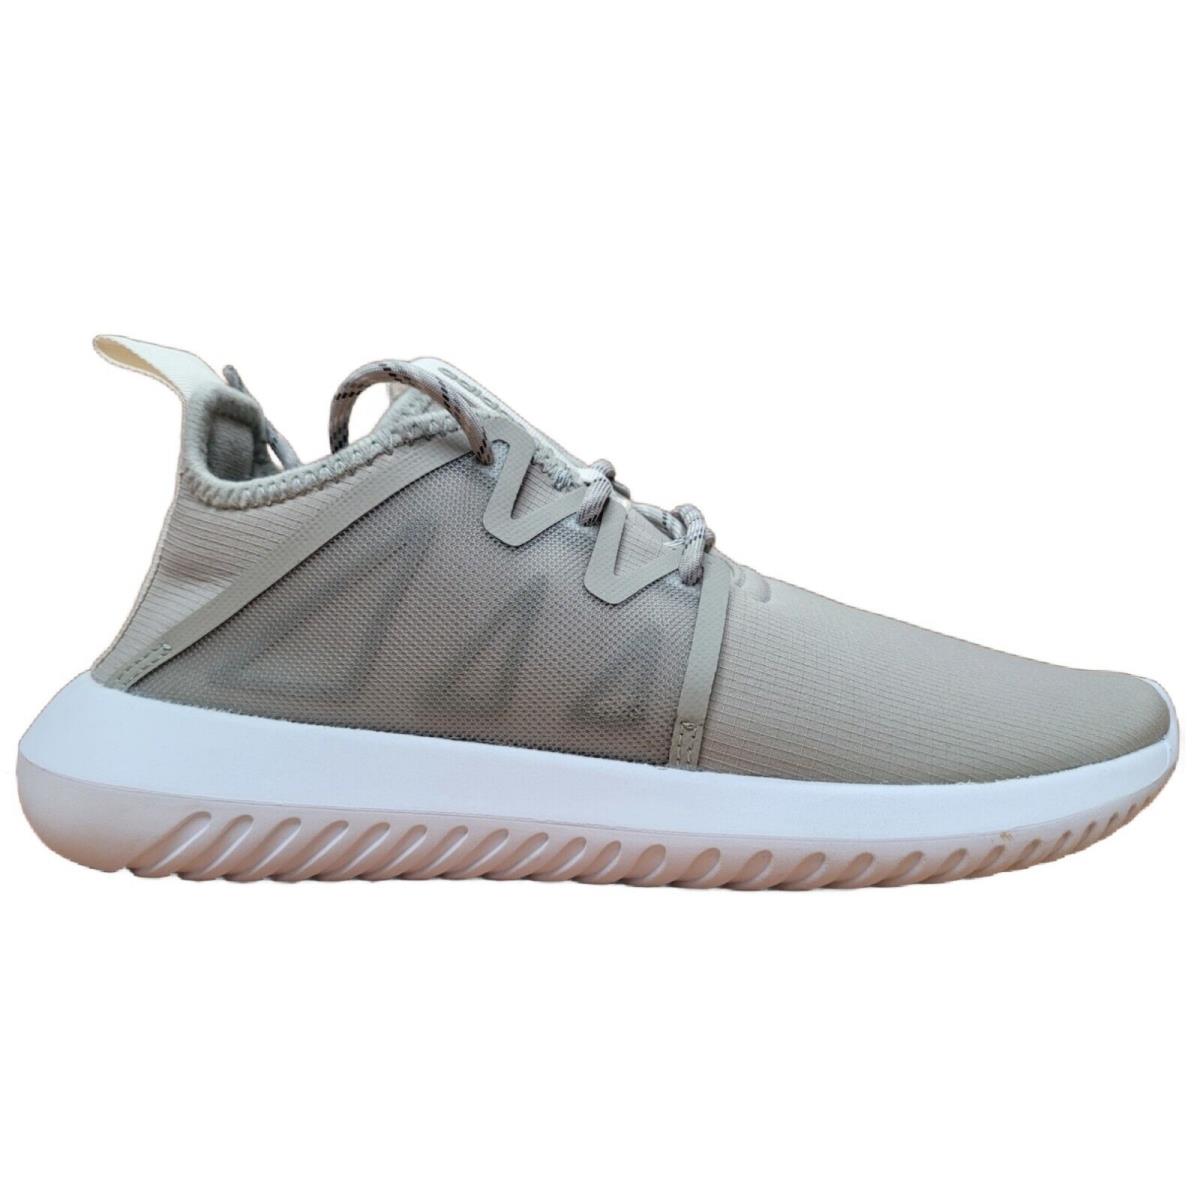 Adidas Tubular Viral2 Womens Size 6.5 - BY9744 Sesame White Shoes